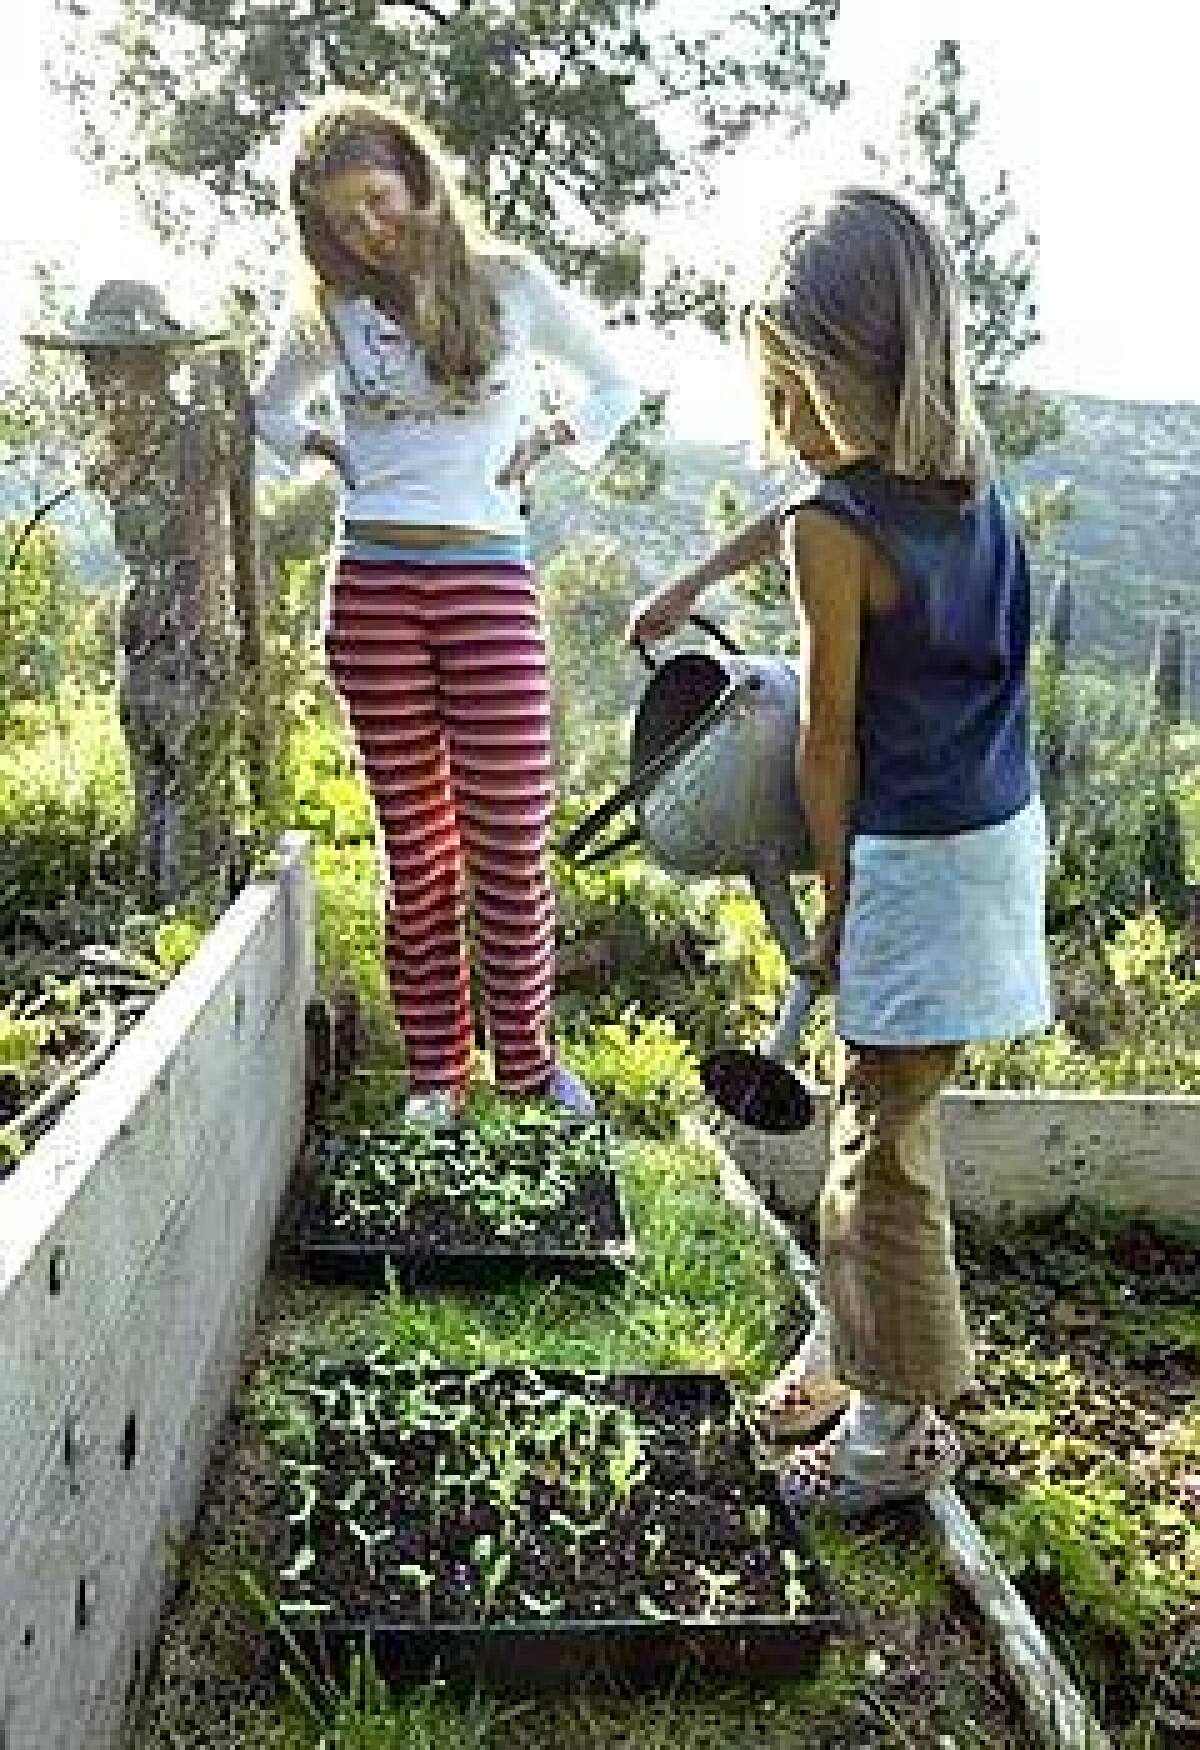 Shannon McGiffert and daughter Natalie, 8, care for sunflower seedlings at their Topanga home. They bring the flats inside each night to protect the young plants from scavengers.